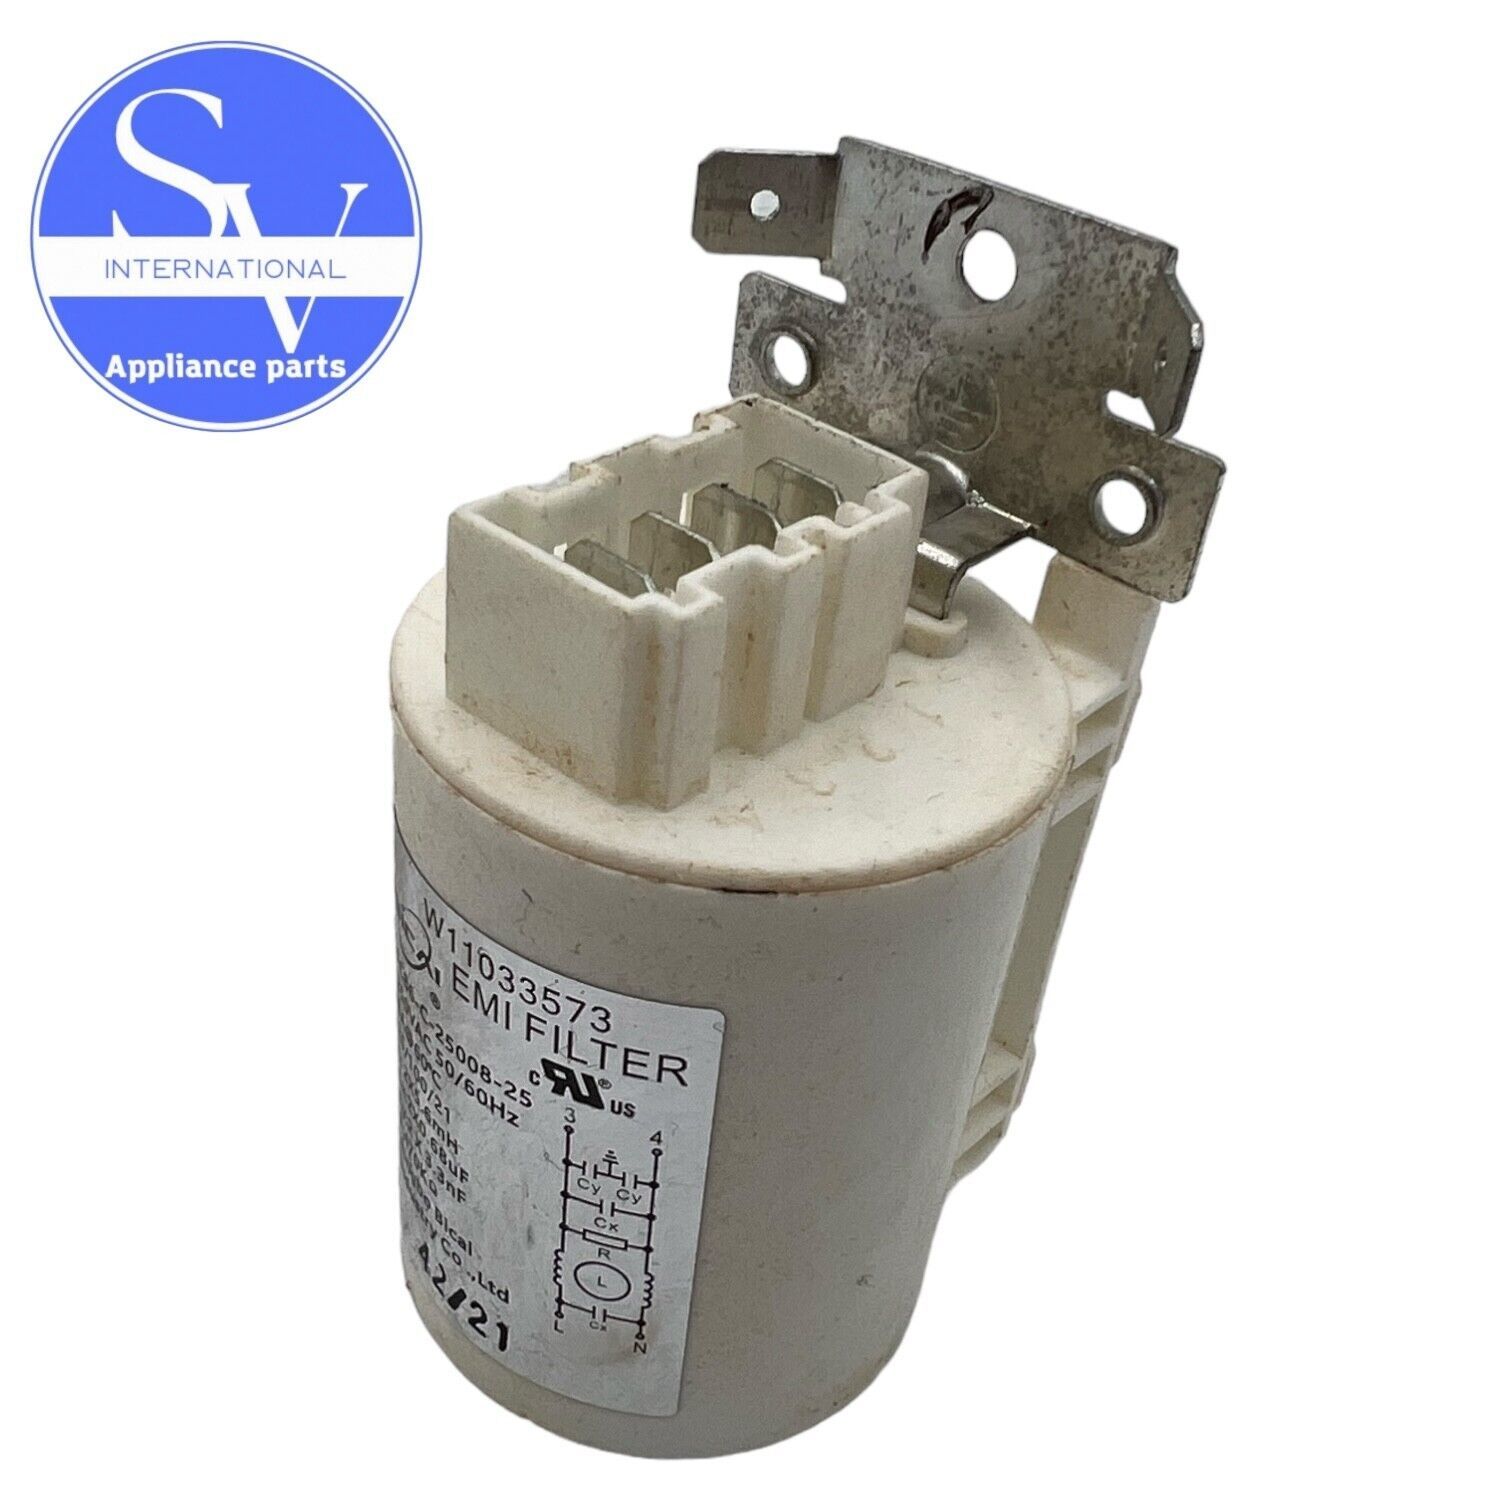 Whirlpool Washer Noise Filter W11614635 W11033573 - $11.20